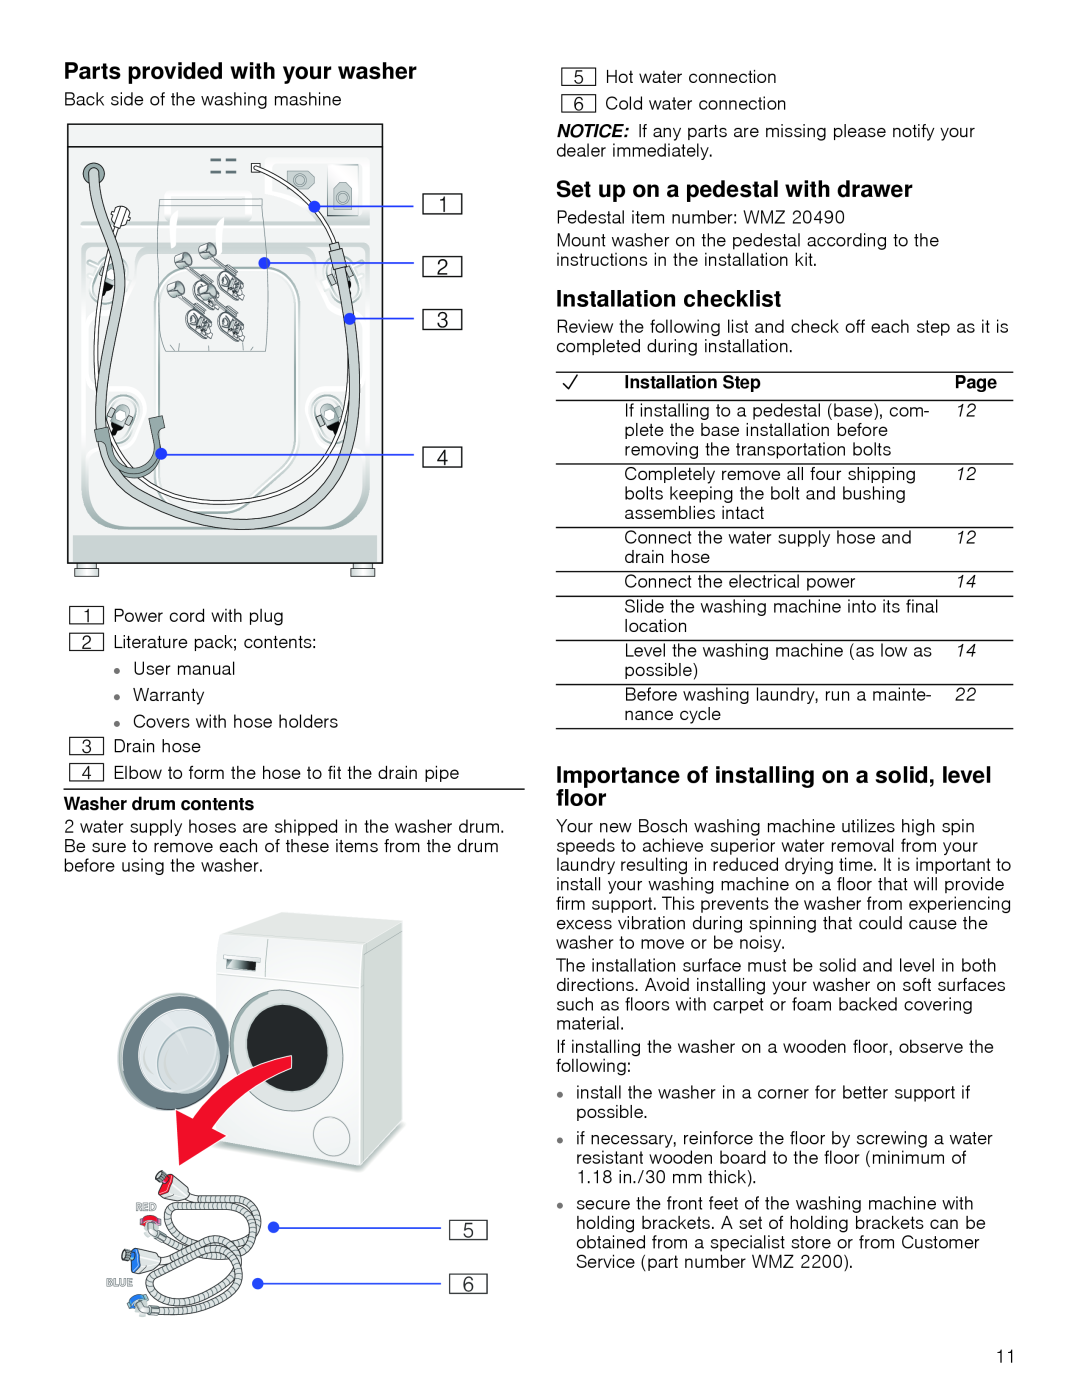 Bosch Appliances WAP24201UC Parts provided with your washer, Set up on a pedestal with drawer, Installation checklist 